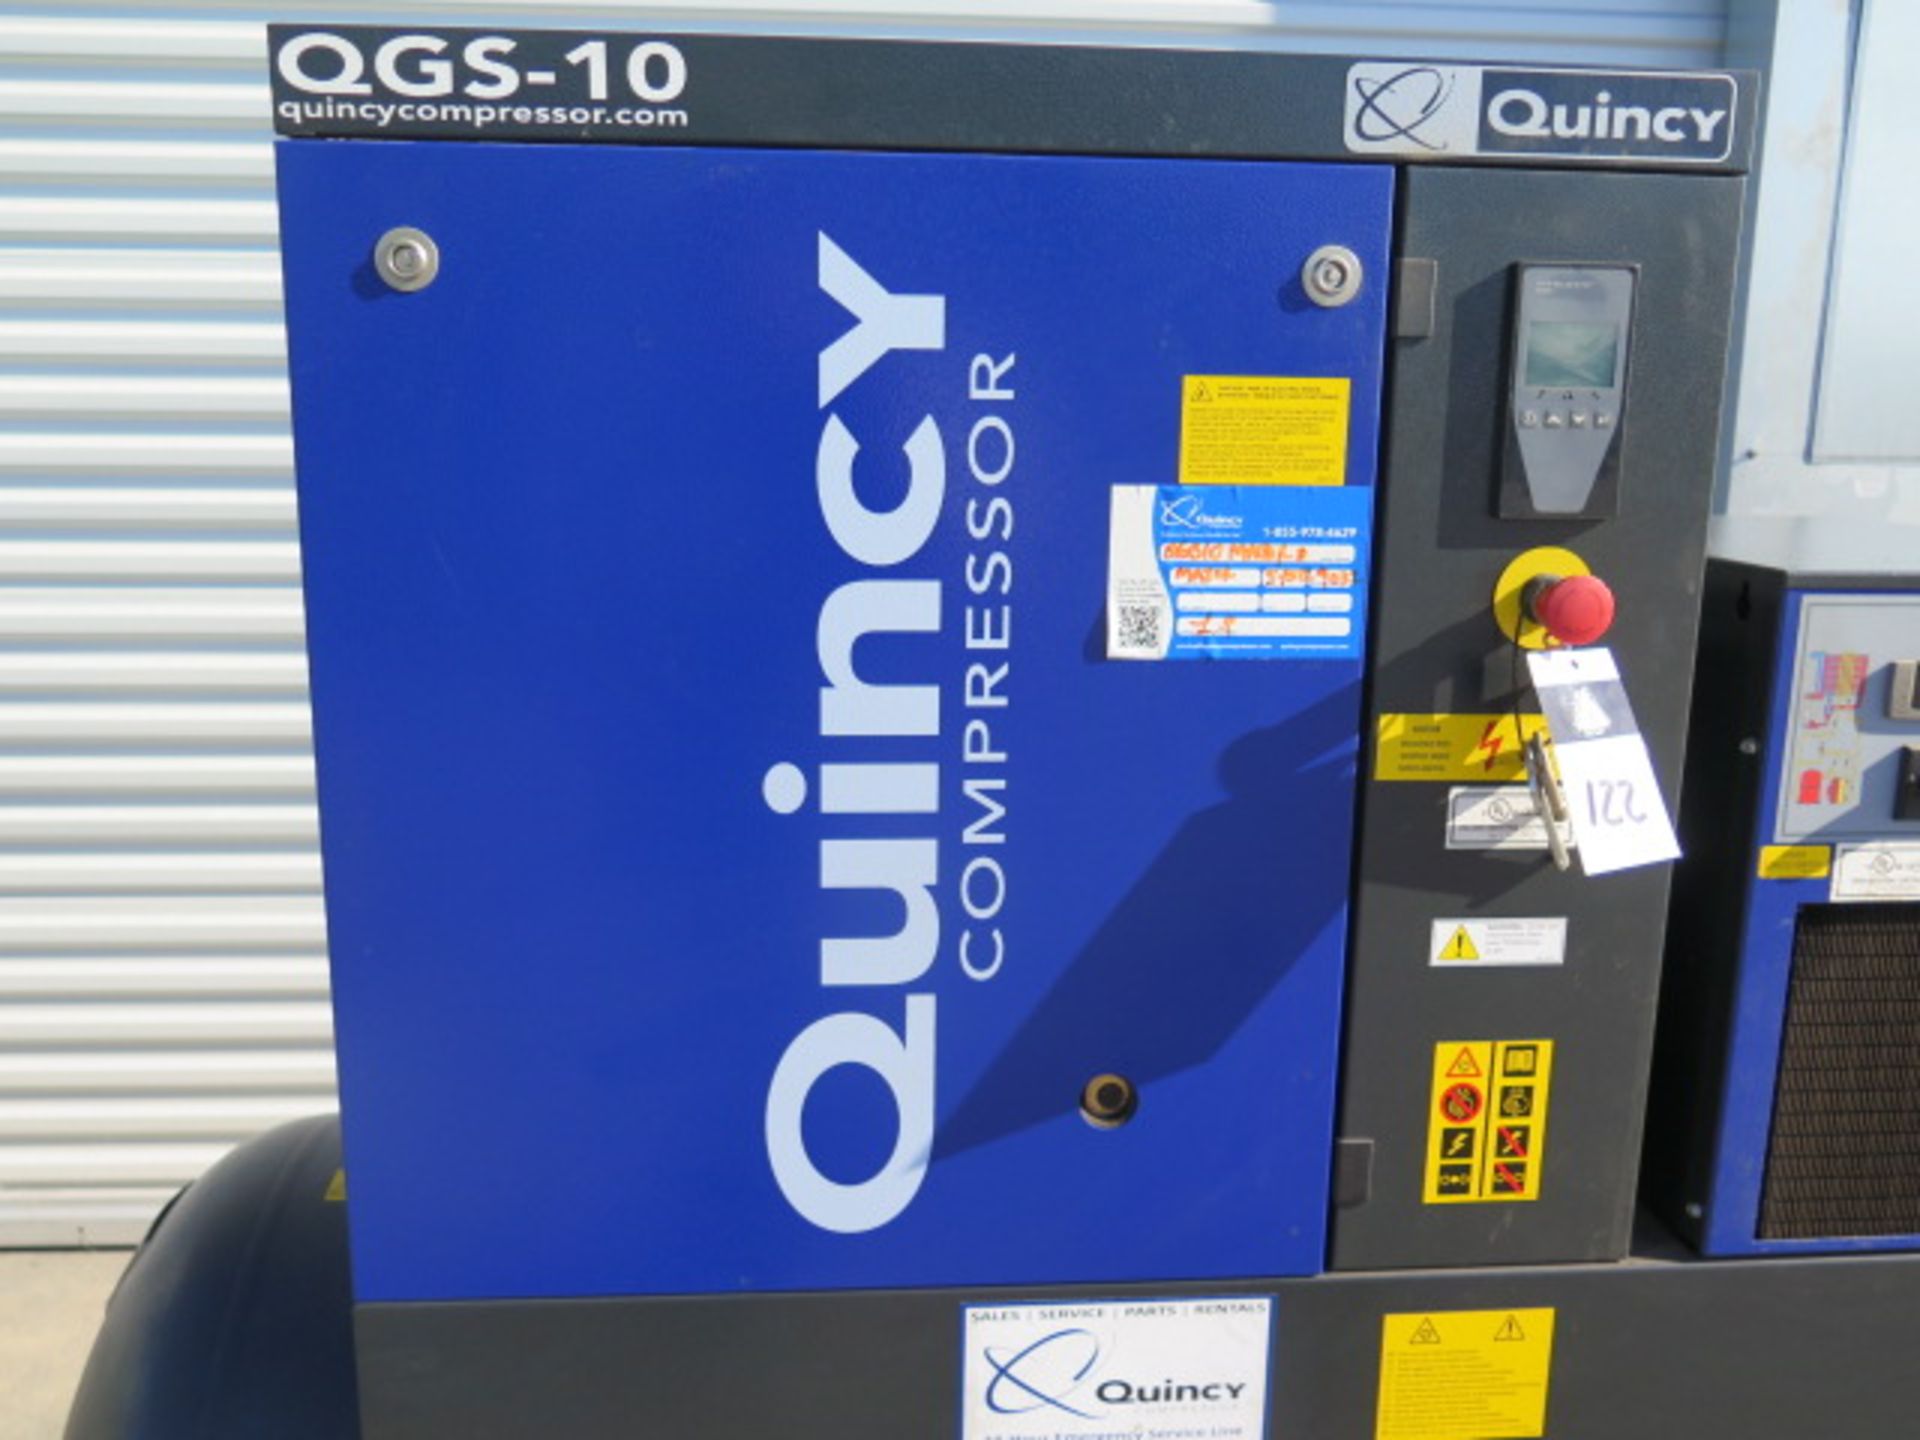 2019 Quincy QGS-10 DT120 10Hp Rotary Air Comp s/n ITJ234684 w/ Dig Controls, Low Hours, SOLD AS IS - Image 4 of 9